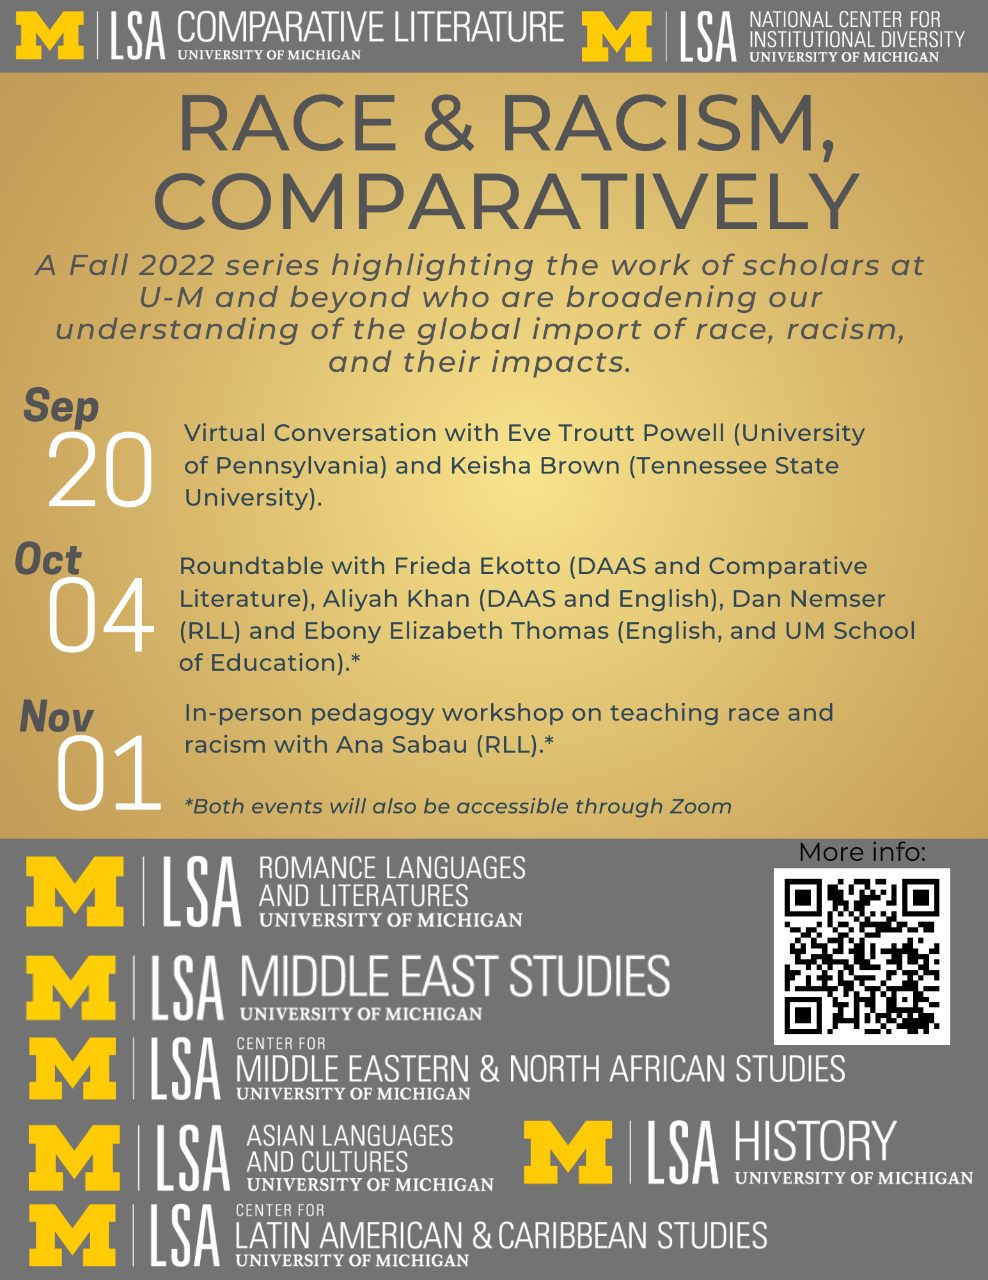 Text, “Race and Racism, Comparatively. A Fall 2022 series highlighting the work of scholars at U-M and beyond who are broadening our understanding of the global import of race, racism, and their impacts. September 20th, Virtual Conversation with Eve Troutt Powell (University of Pennsylvania) and Keisha Brown (Tennessee State University). October 4, Roundtable with Frieda Ekotto (DAAS and Comparative Literature), Aliyah Khan (DAAS and English), Dan Nemser (RLL) and Ebony Elizabeth Thomas (English, and UM School of Education). November 1, In-person pedagogy workshop on teaching race and racism with Ana Sabau (RLL).”